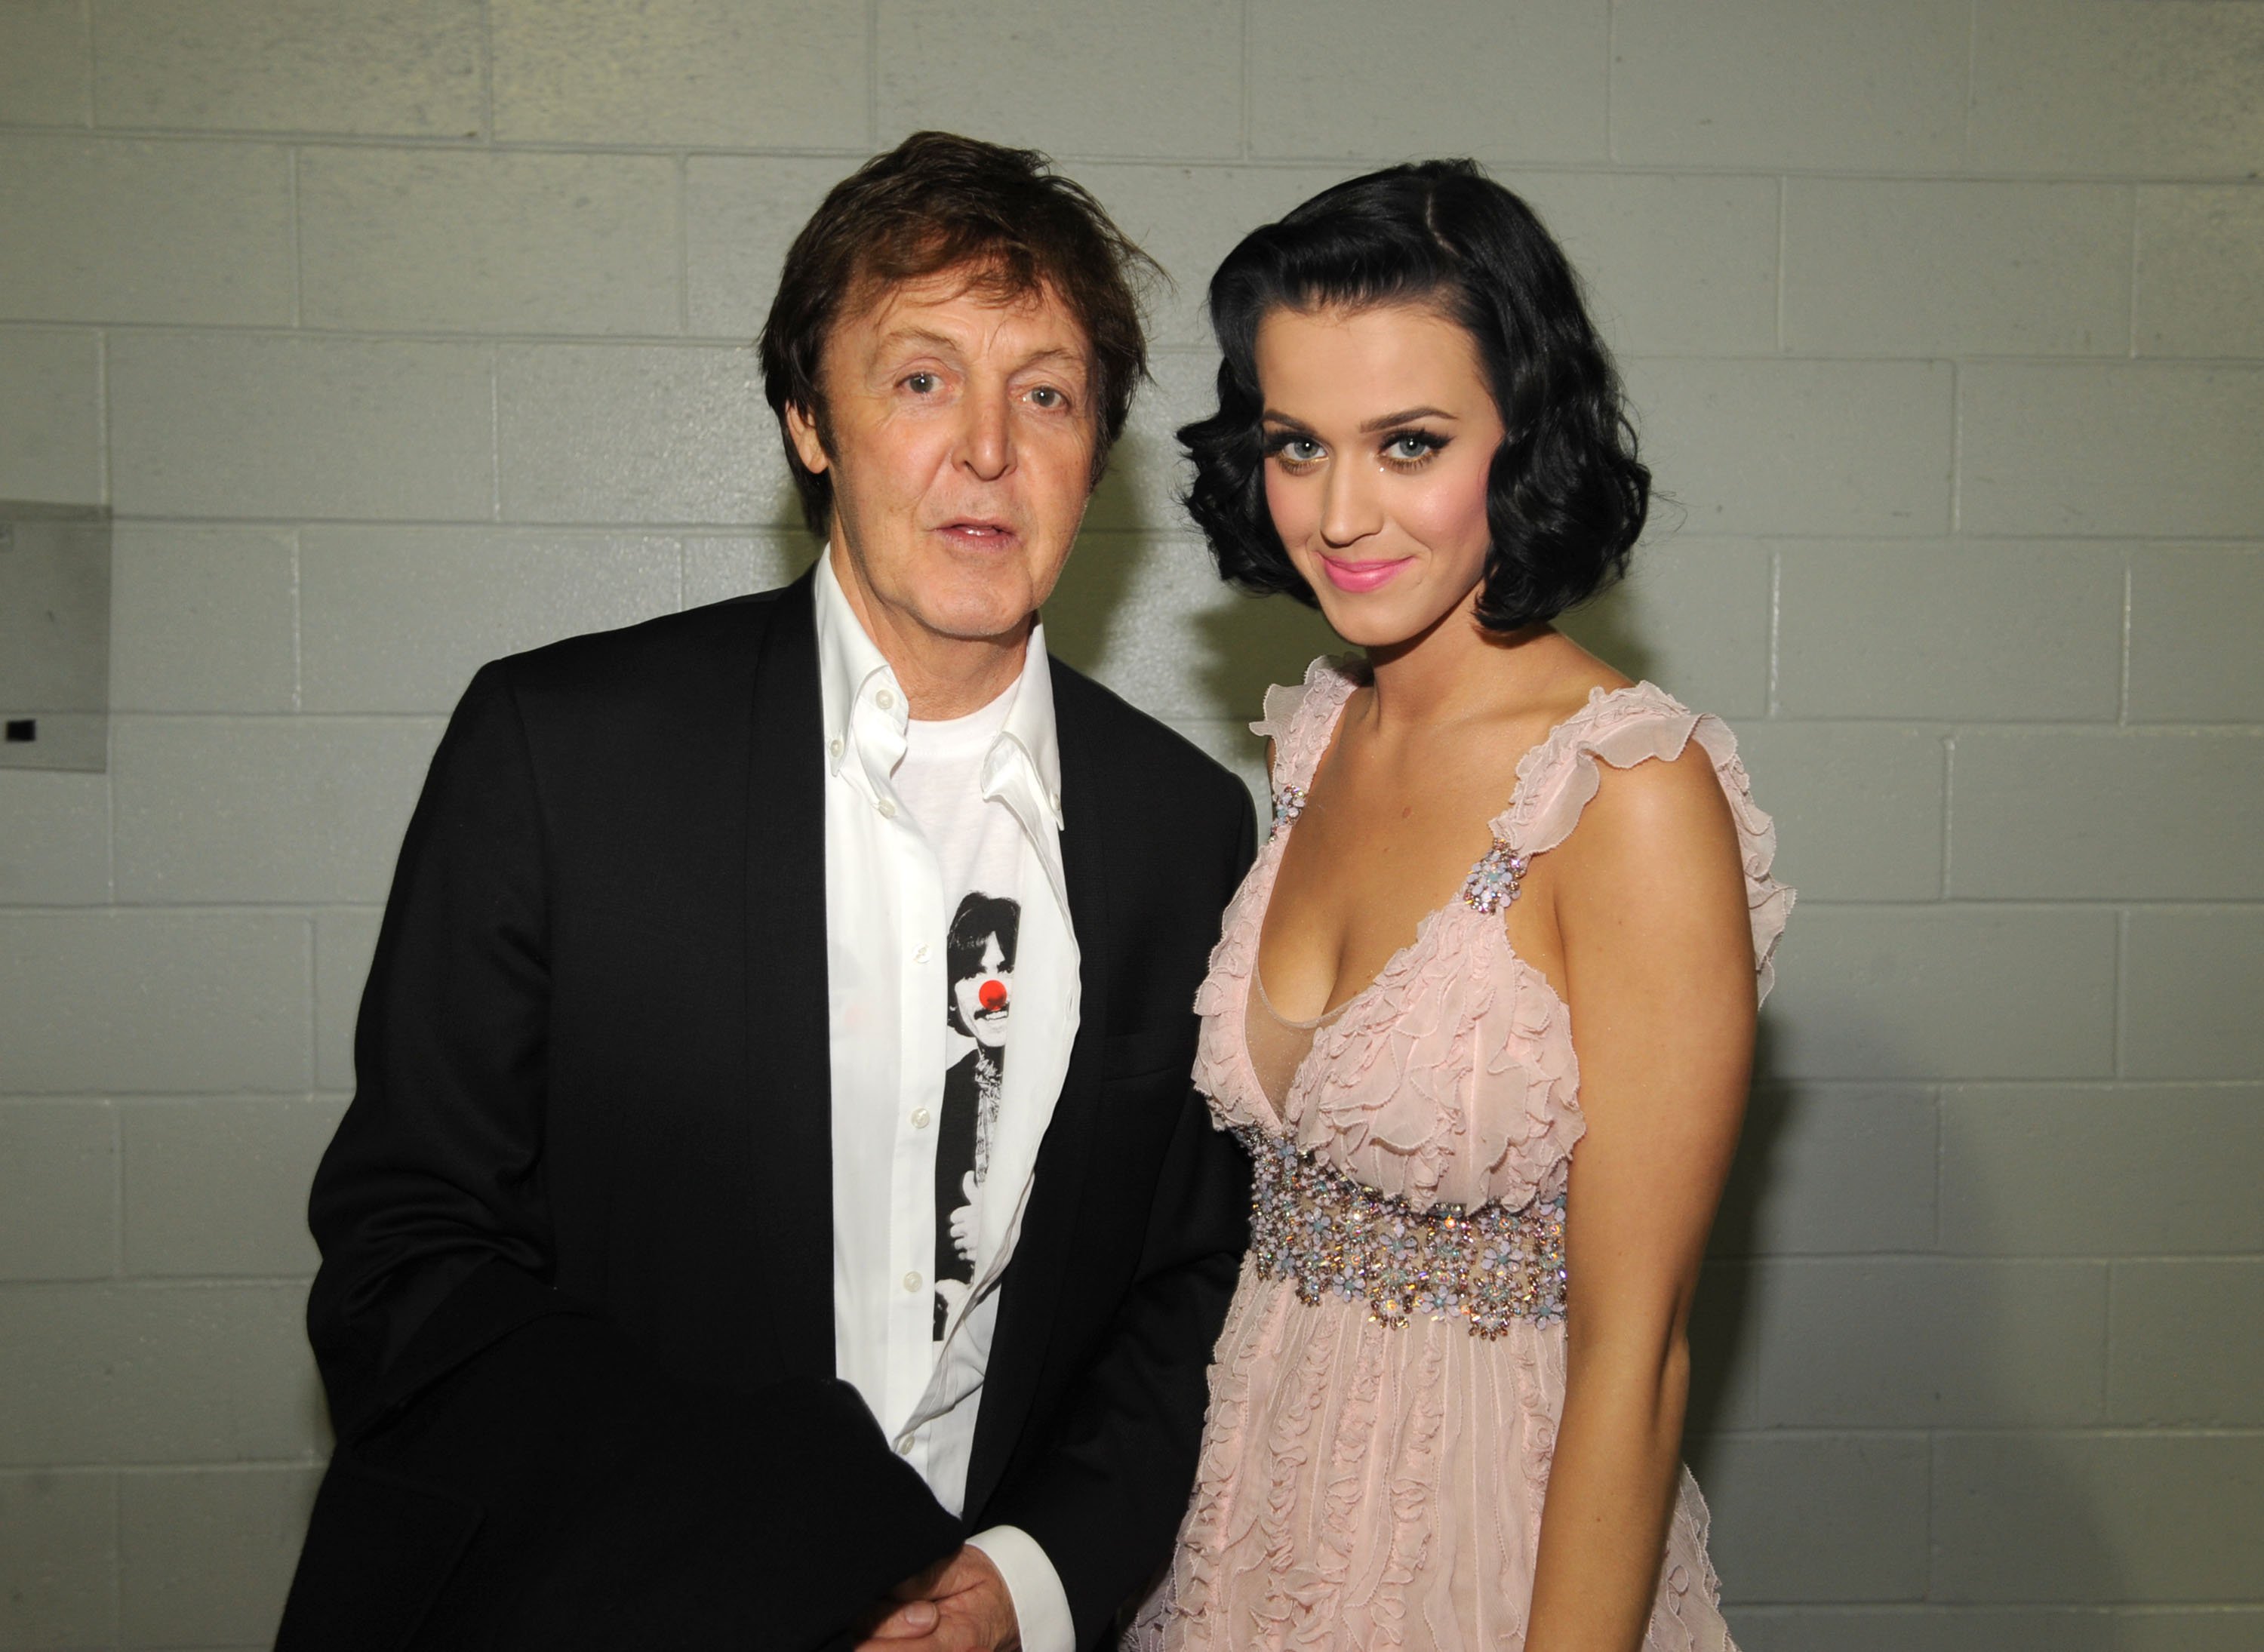 The Beatles' Paul McCartney and Katy Perry standing in front of a white wall